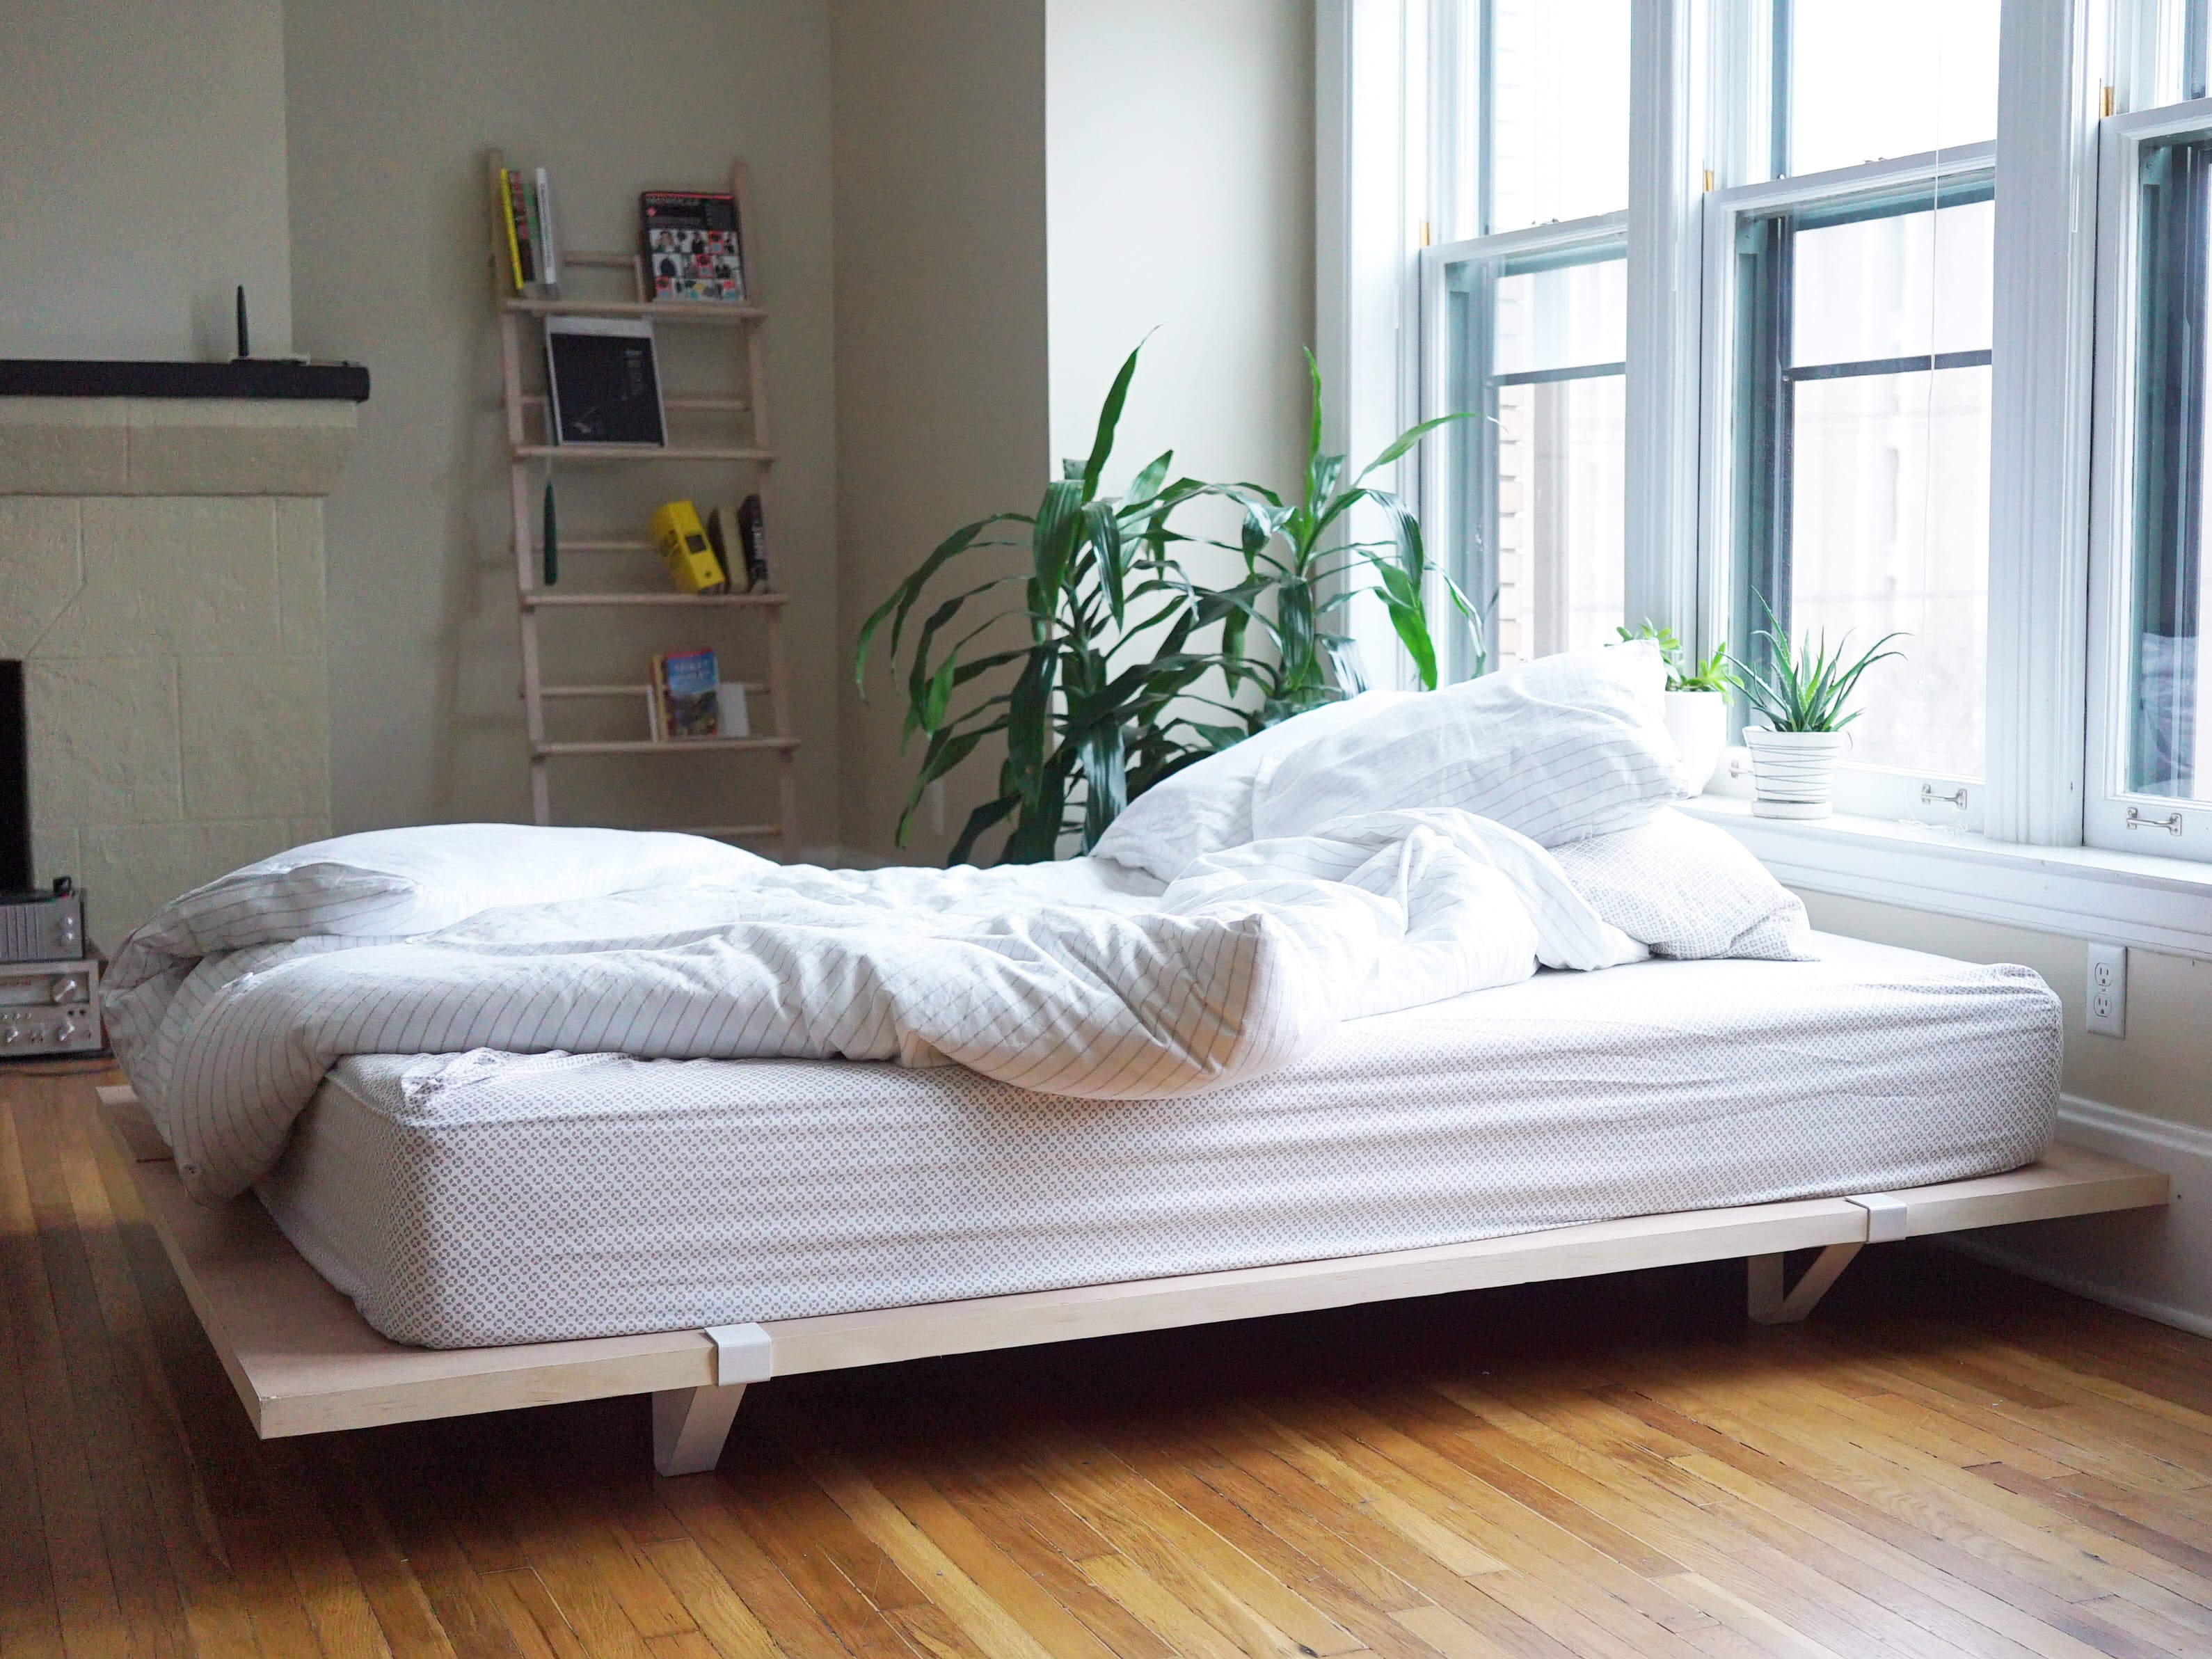 The Floyd Bed Frame - Minimal, lightweight, simple-to-assemble bed